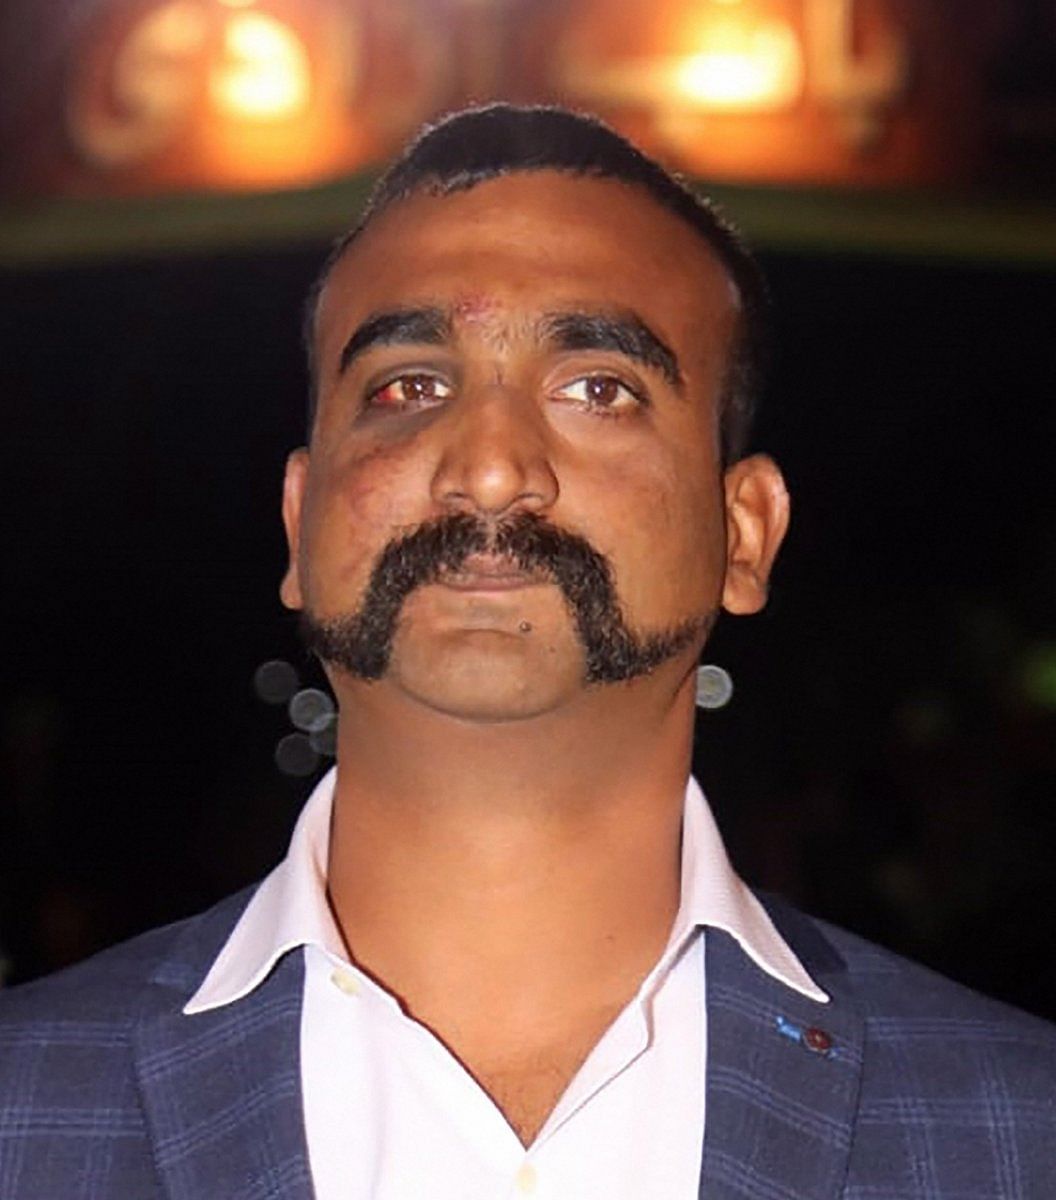 IAF pilot Abhinandan Varthaman has become afashion icon of sorts for young men who are rushingto get his ‘gunslinger’ moustache.